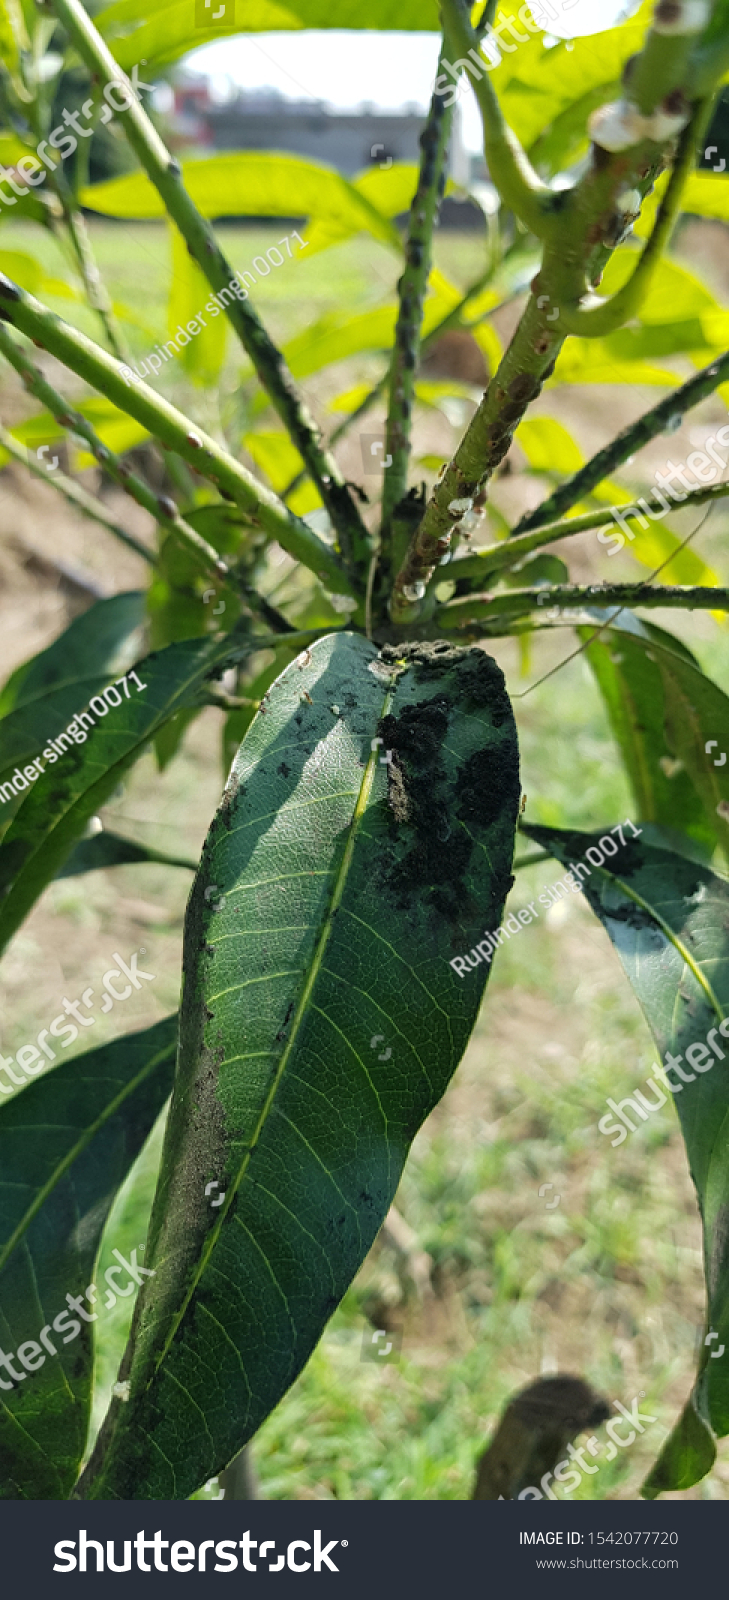 Mango Scale Insect and development of sooty mold #1542077720